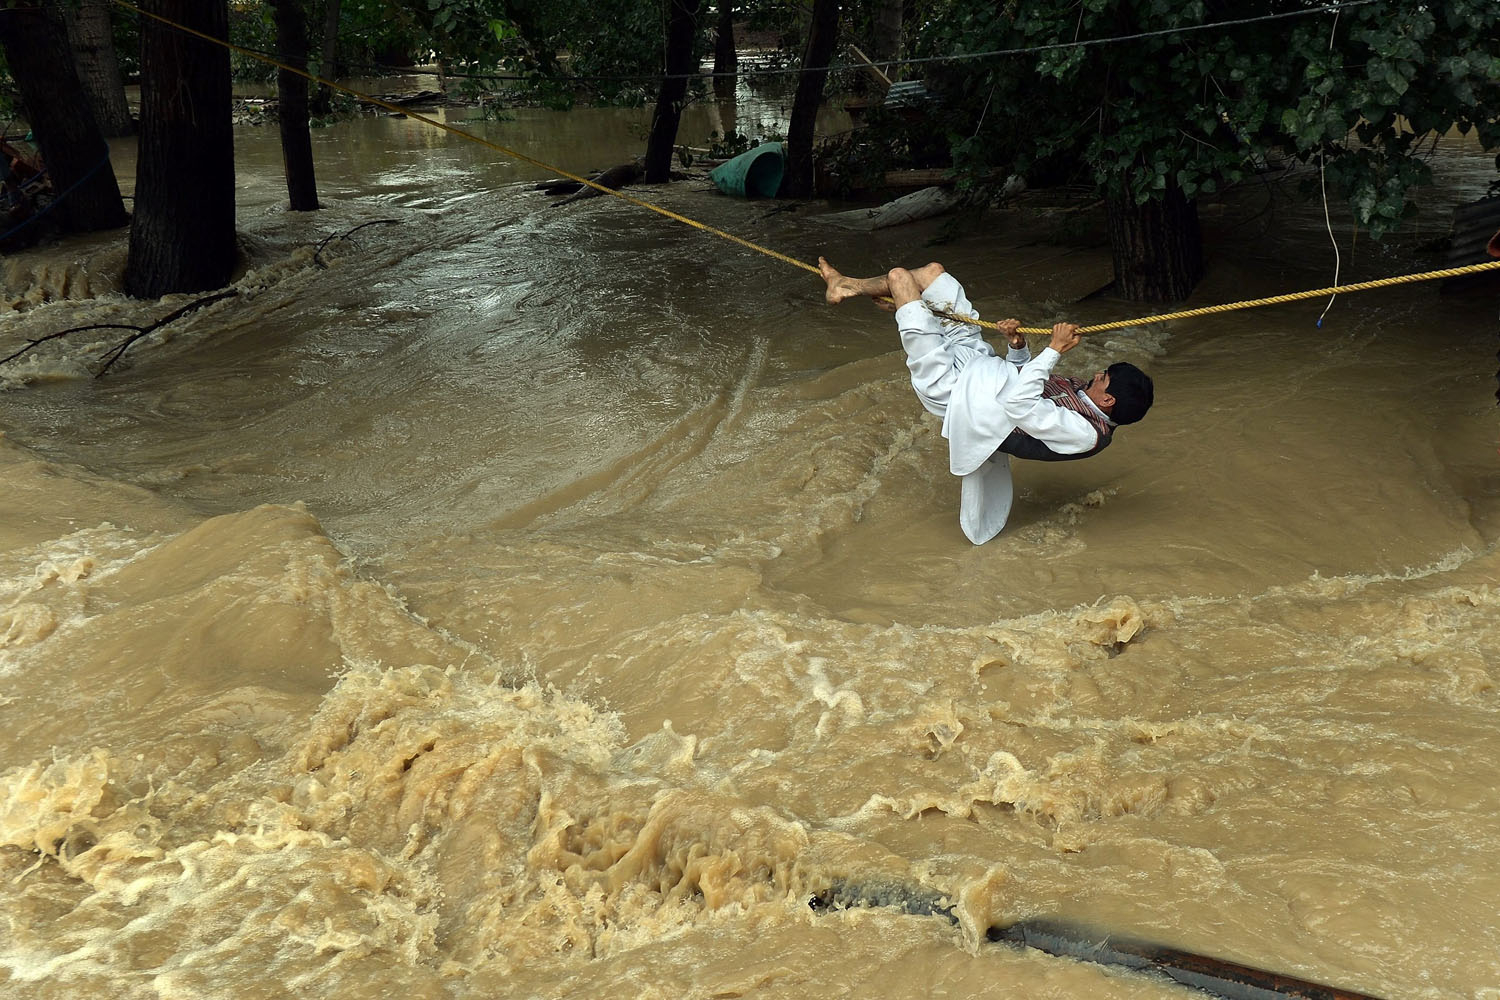 Sept. 9, 2014. An Indian Kashmiri man crosses over flood waters with the use of a rope in Srinagar. Bewildered families, nursing children and clutching meagre belongings, packed into makeshift relief centres after fleeing floods in India and Pakistan that have now claimed more than 400 lives.